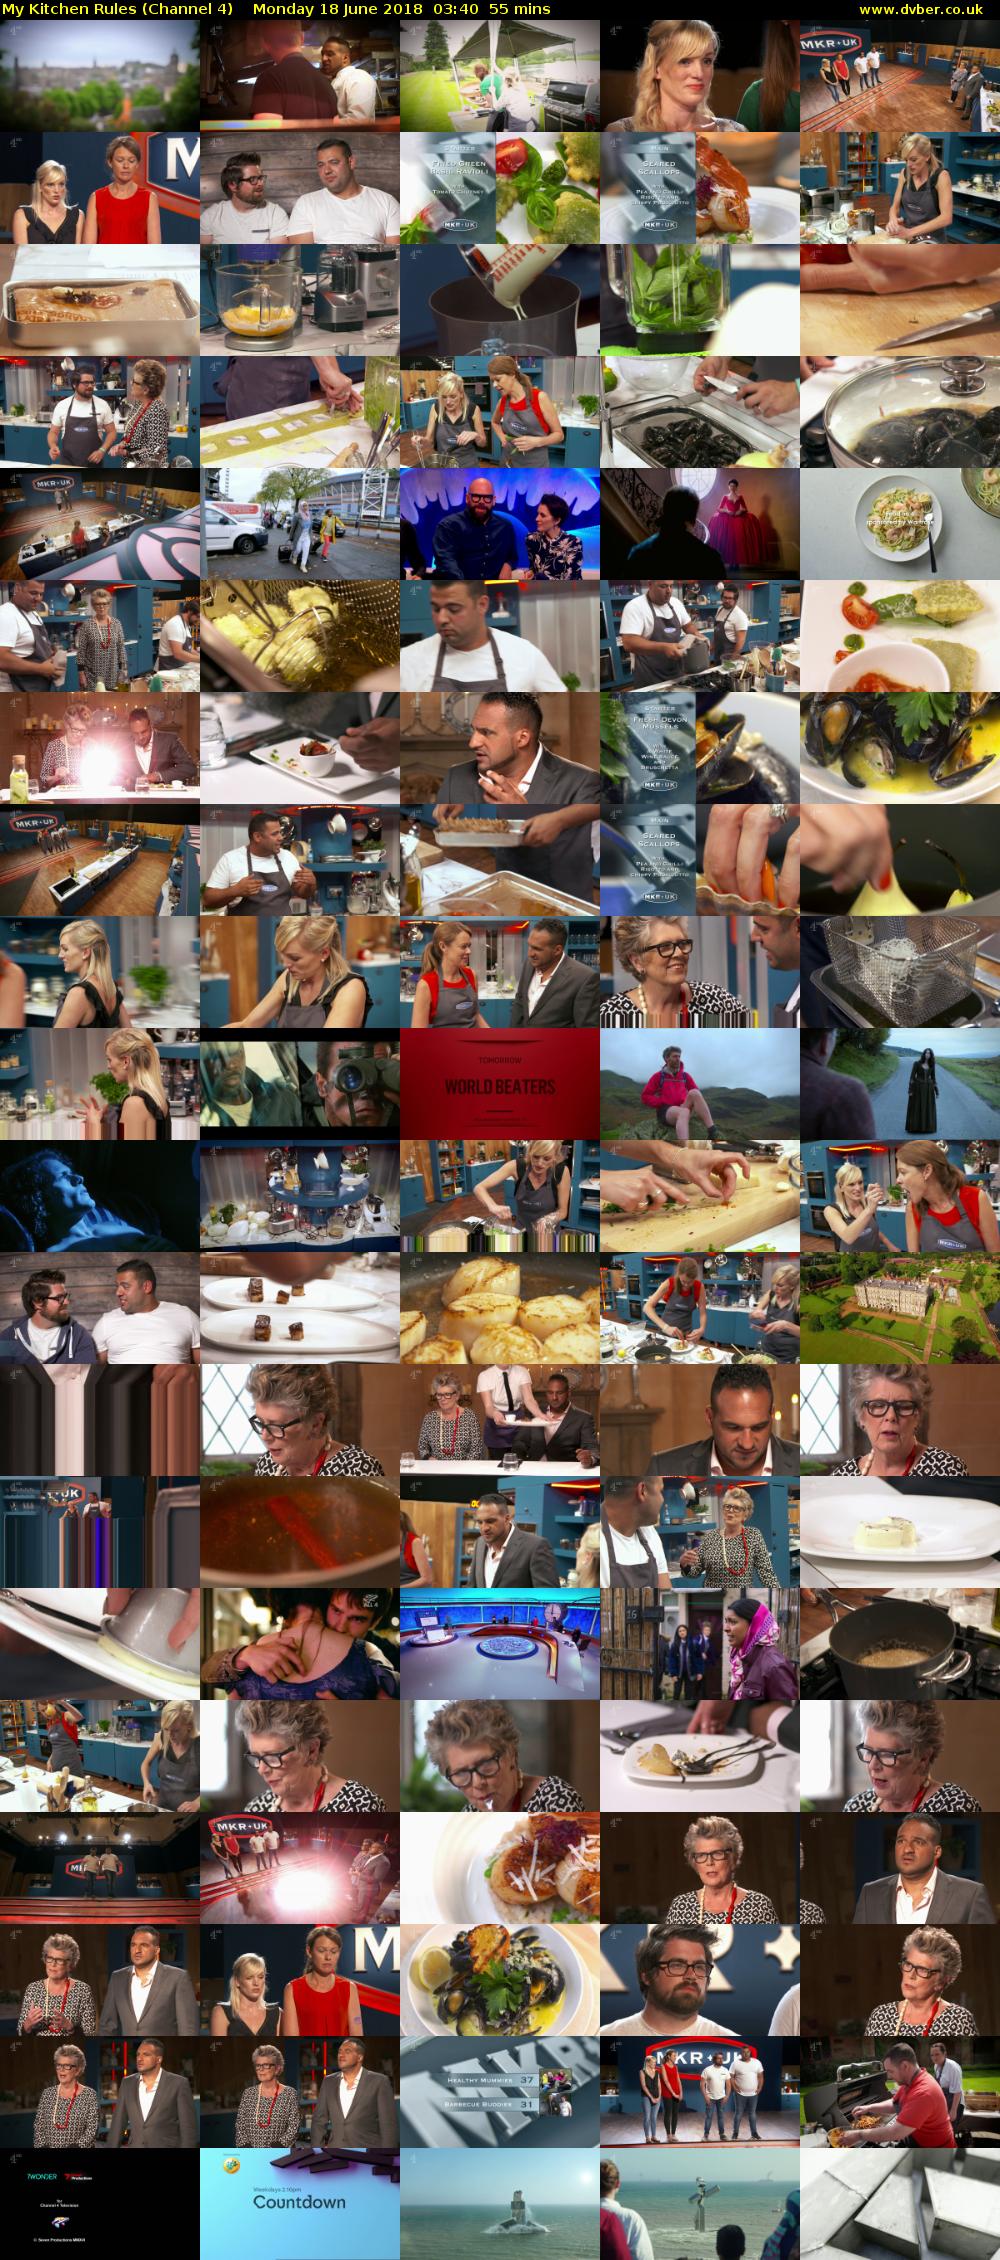 My Kitchen Rules (Channel 4) Monday 18 June 2018 03:40 - 04:35